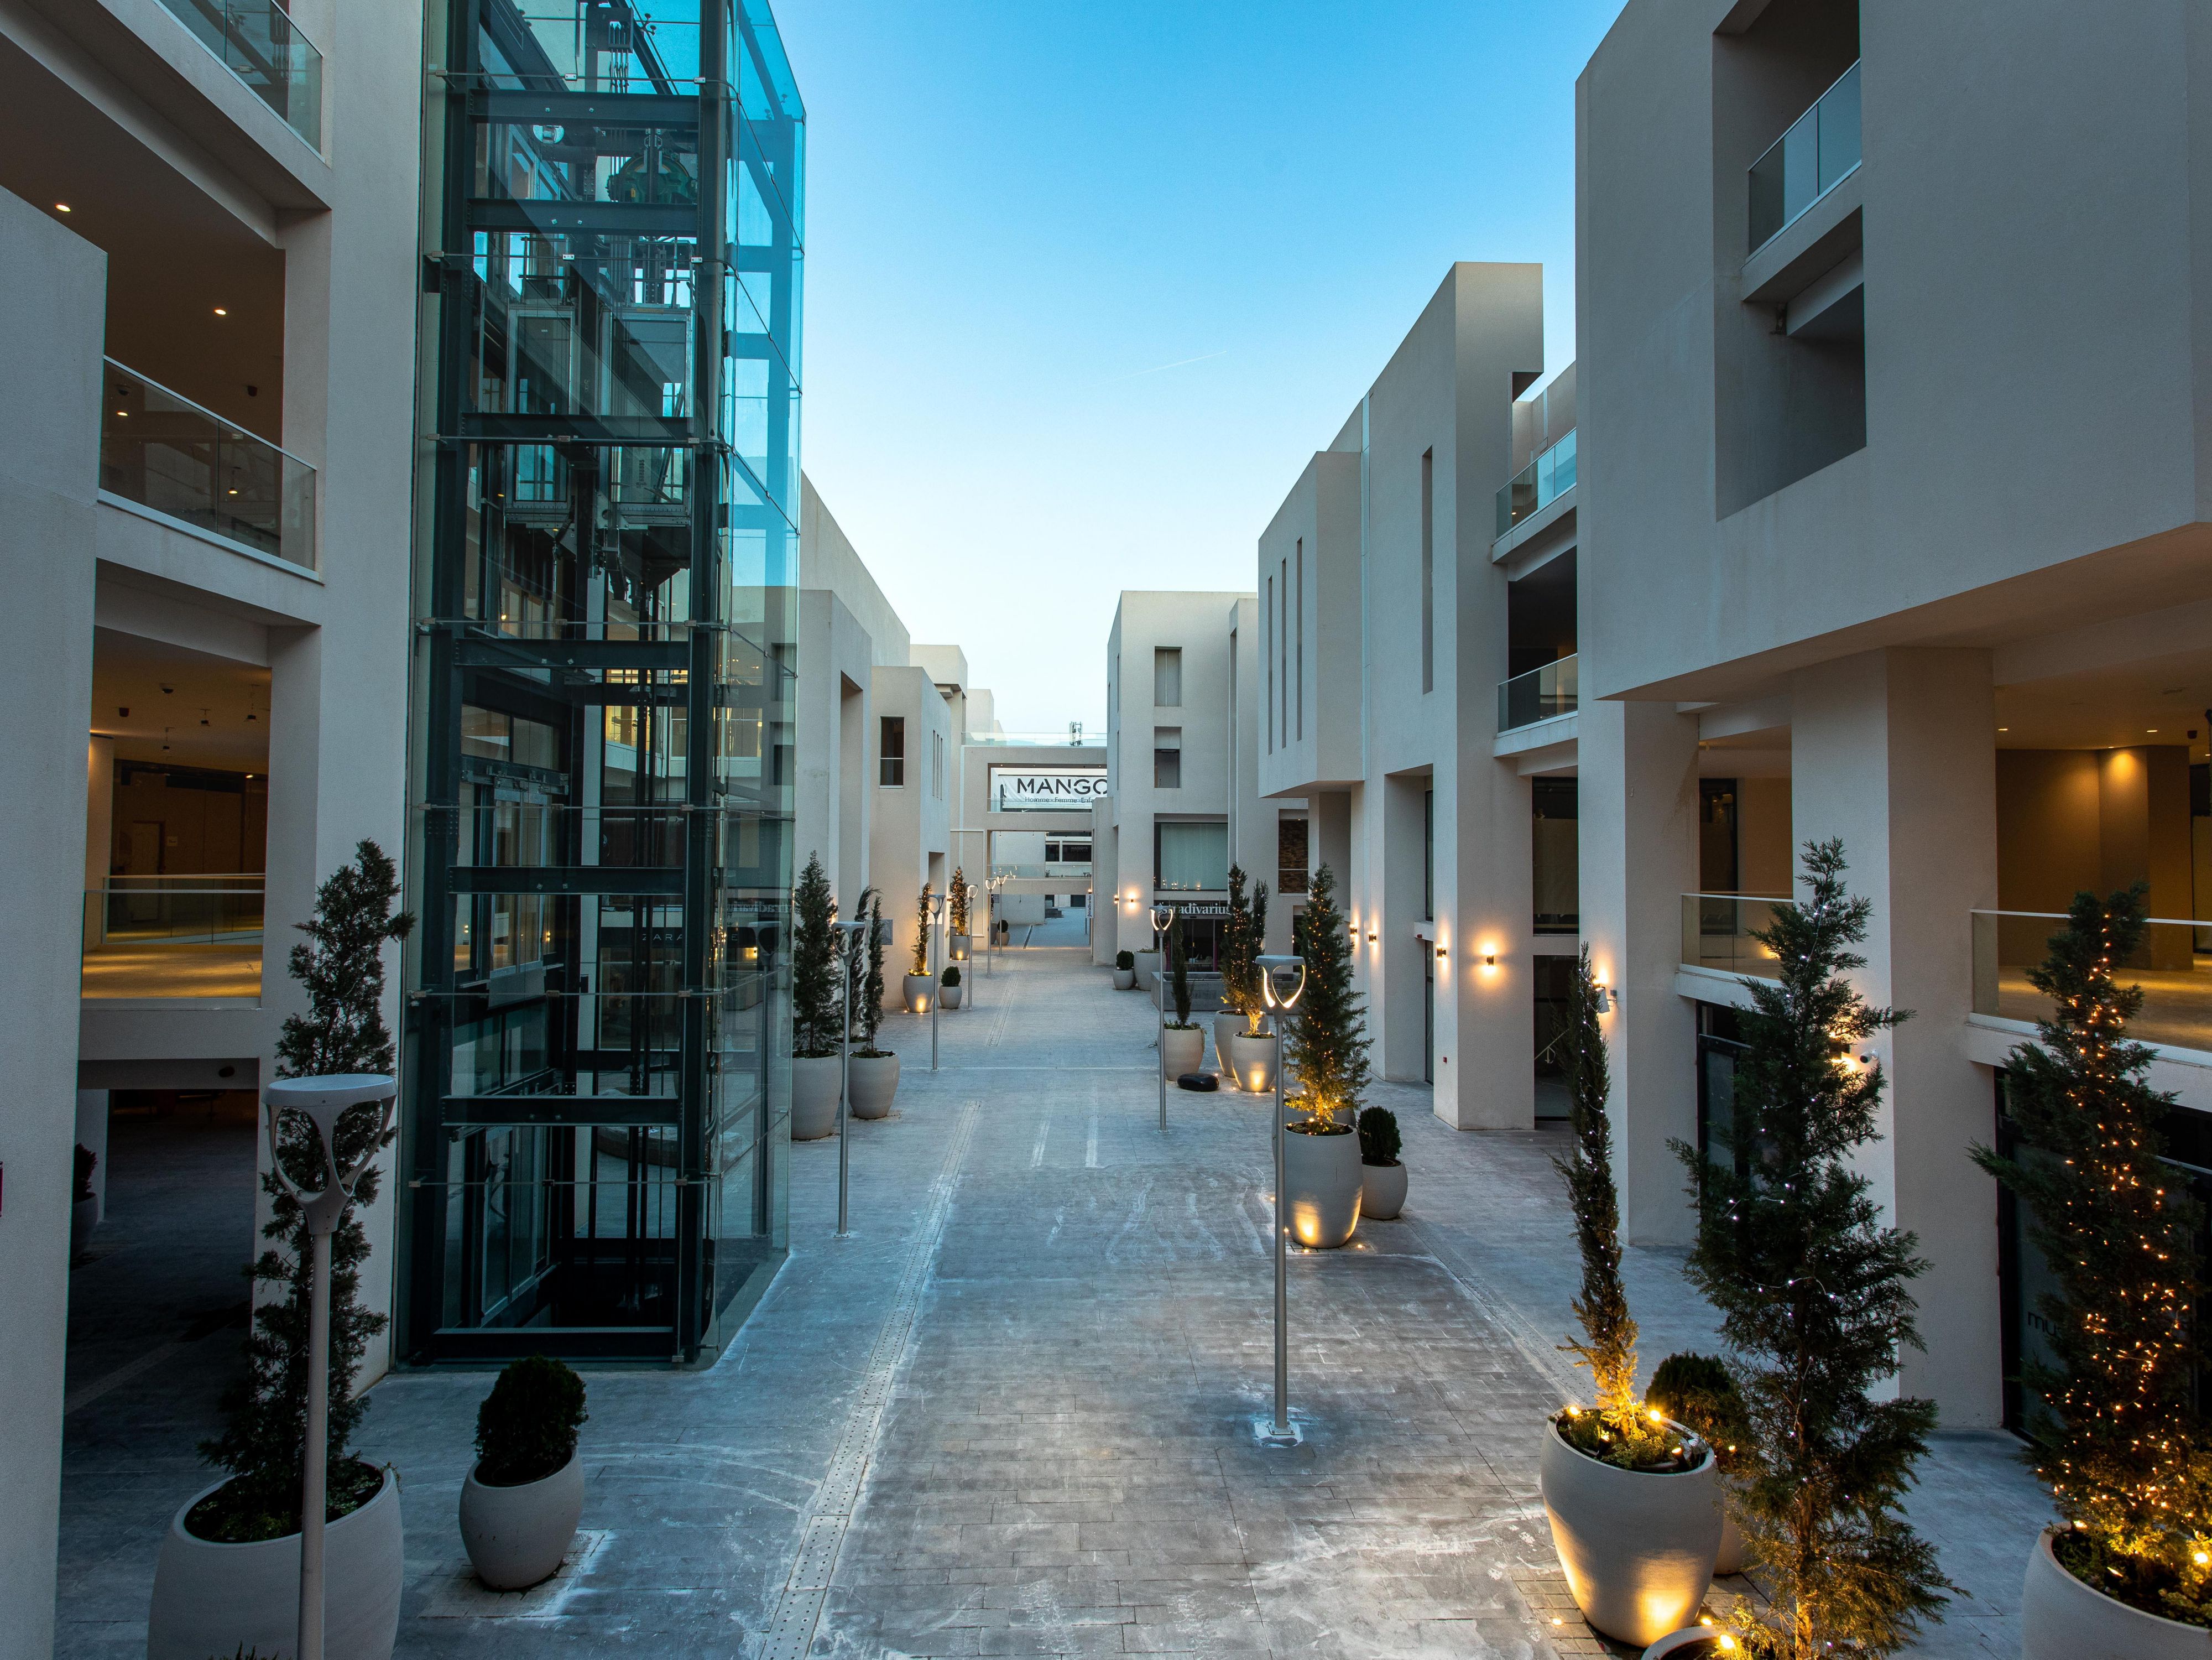 To fully enjoy your stay, we invite you to visit the Lifestyle Mall Garden City, which is located 300 meters from our hotel. First open-air shopping center in Algeria, Garden City includes many brands that will please all your desires.